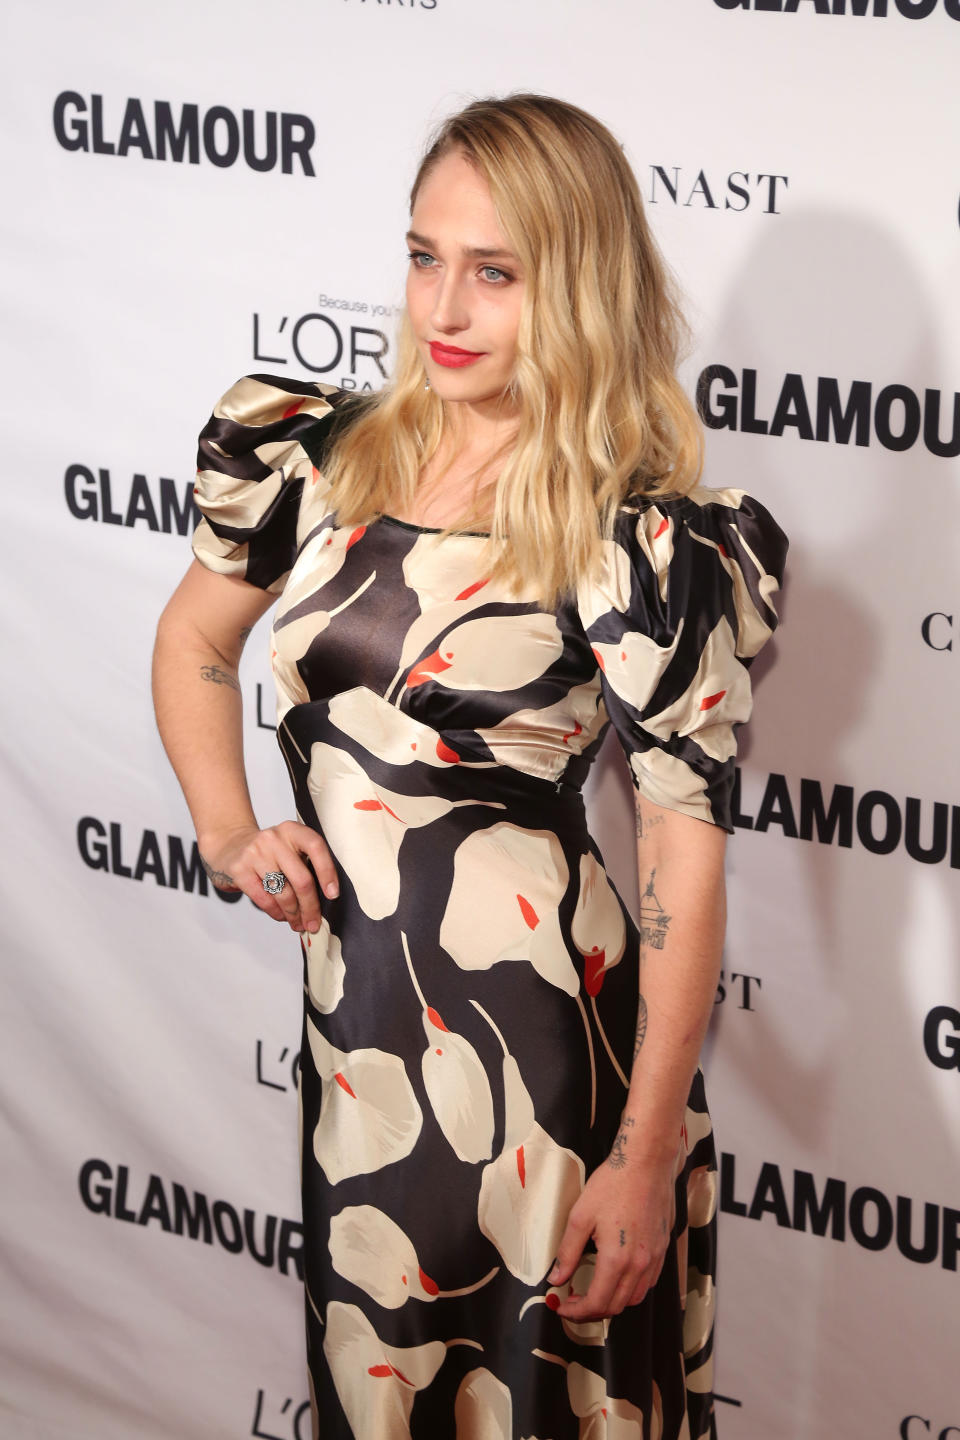 NEW YORK, NY - NOVEMBER 09:  Actress Jemima Kirke attends Glamour's 25th Anniversary Women Of The Year Awards at Carnegie Hall on November 9, 2015 in New York City.  (Photo by Taylor Hill/Getty Images)